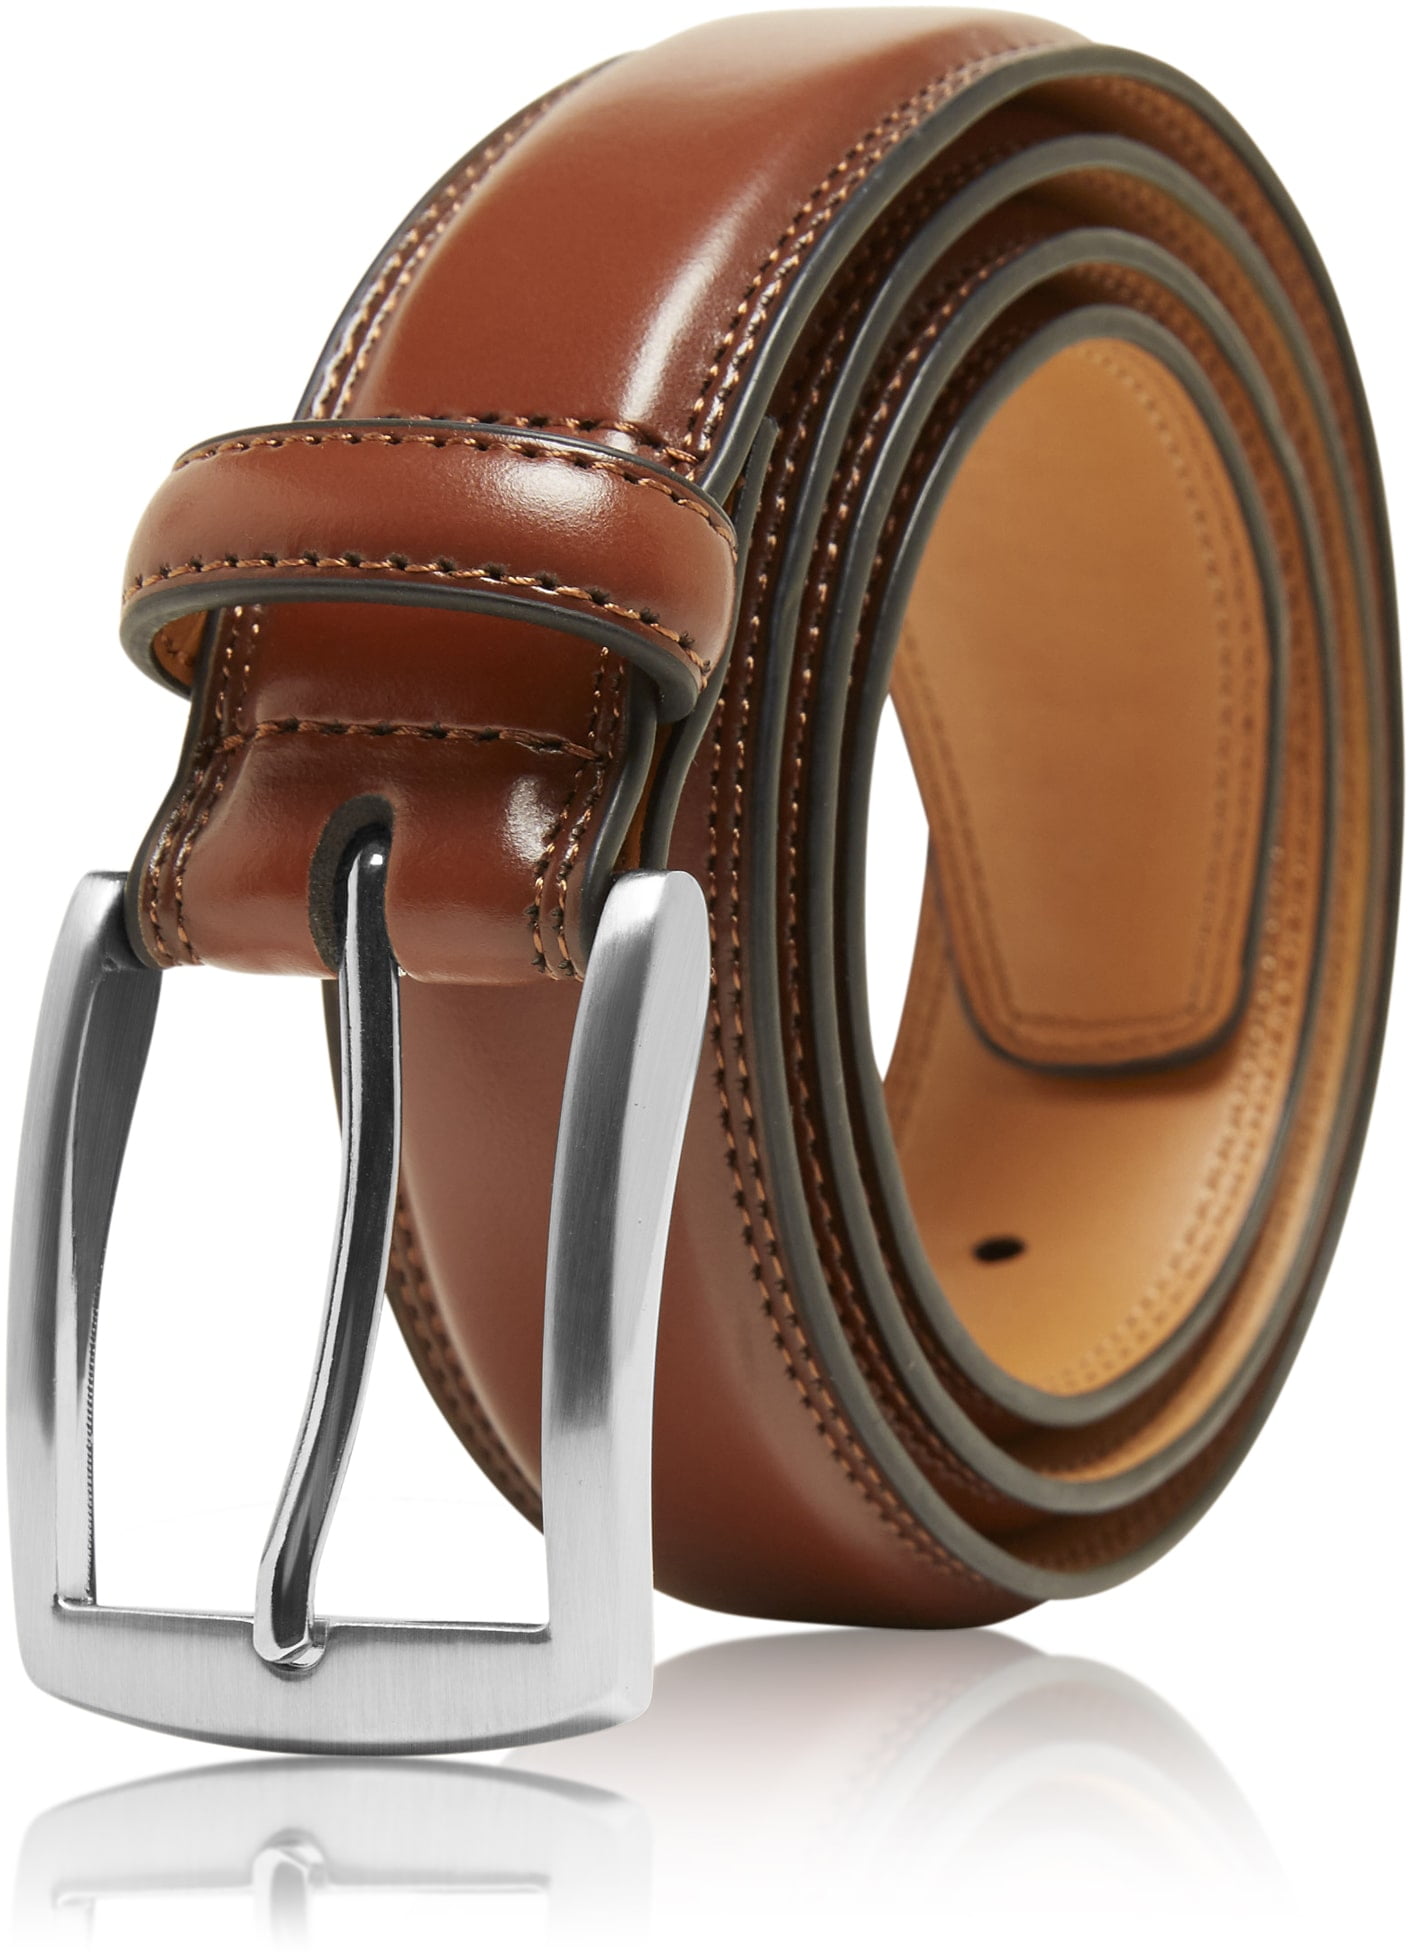 Genuine Leather Dress Belts For Men - Mens Belt For Suits, Jeans, Uniform  With Single Prong Buckle - Designed in the USA 